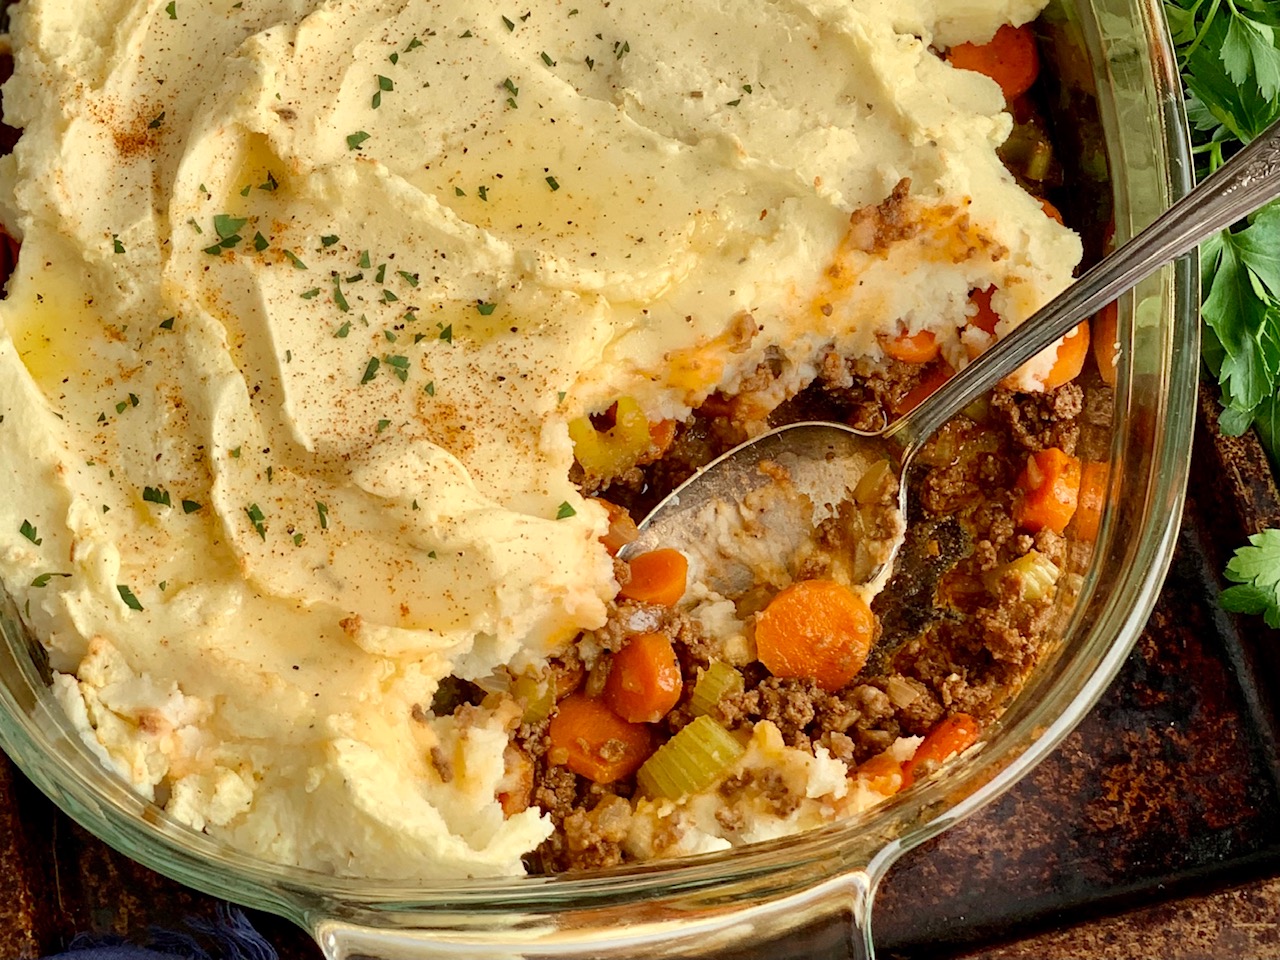 A glass 9x13-inch pan with a celery, carrot, and ground beef mixture topped with creamy and thick mashed potatoes. A spoon has scooped some of the pie out and is in the dish.